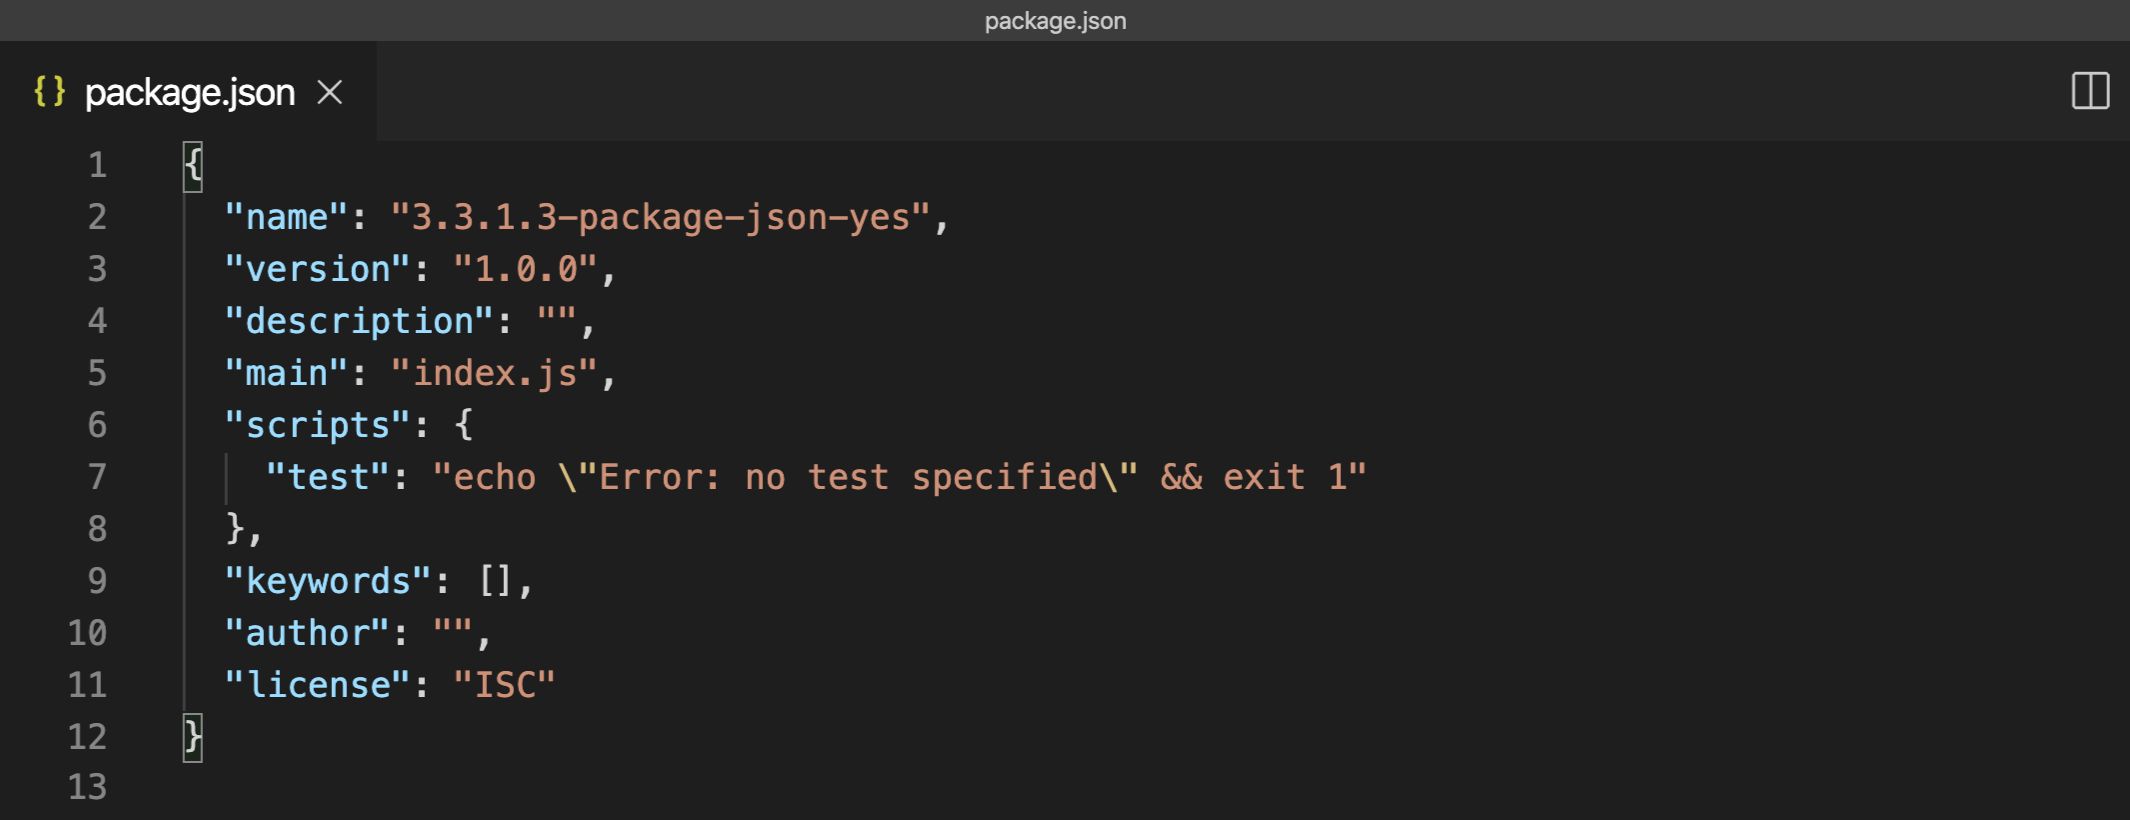 3.3.1.4-package-json-yes-source-file.png